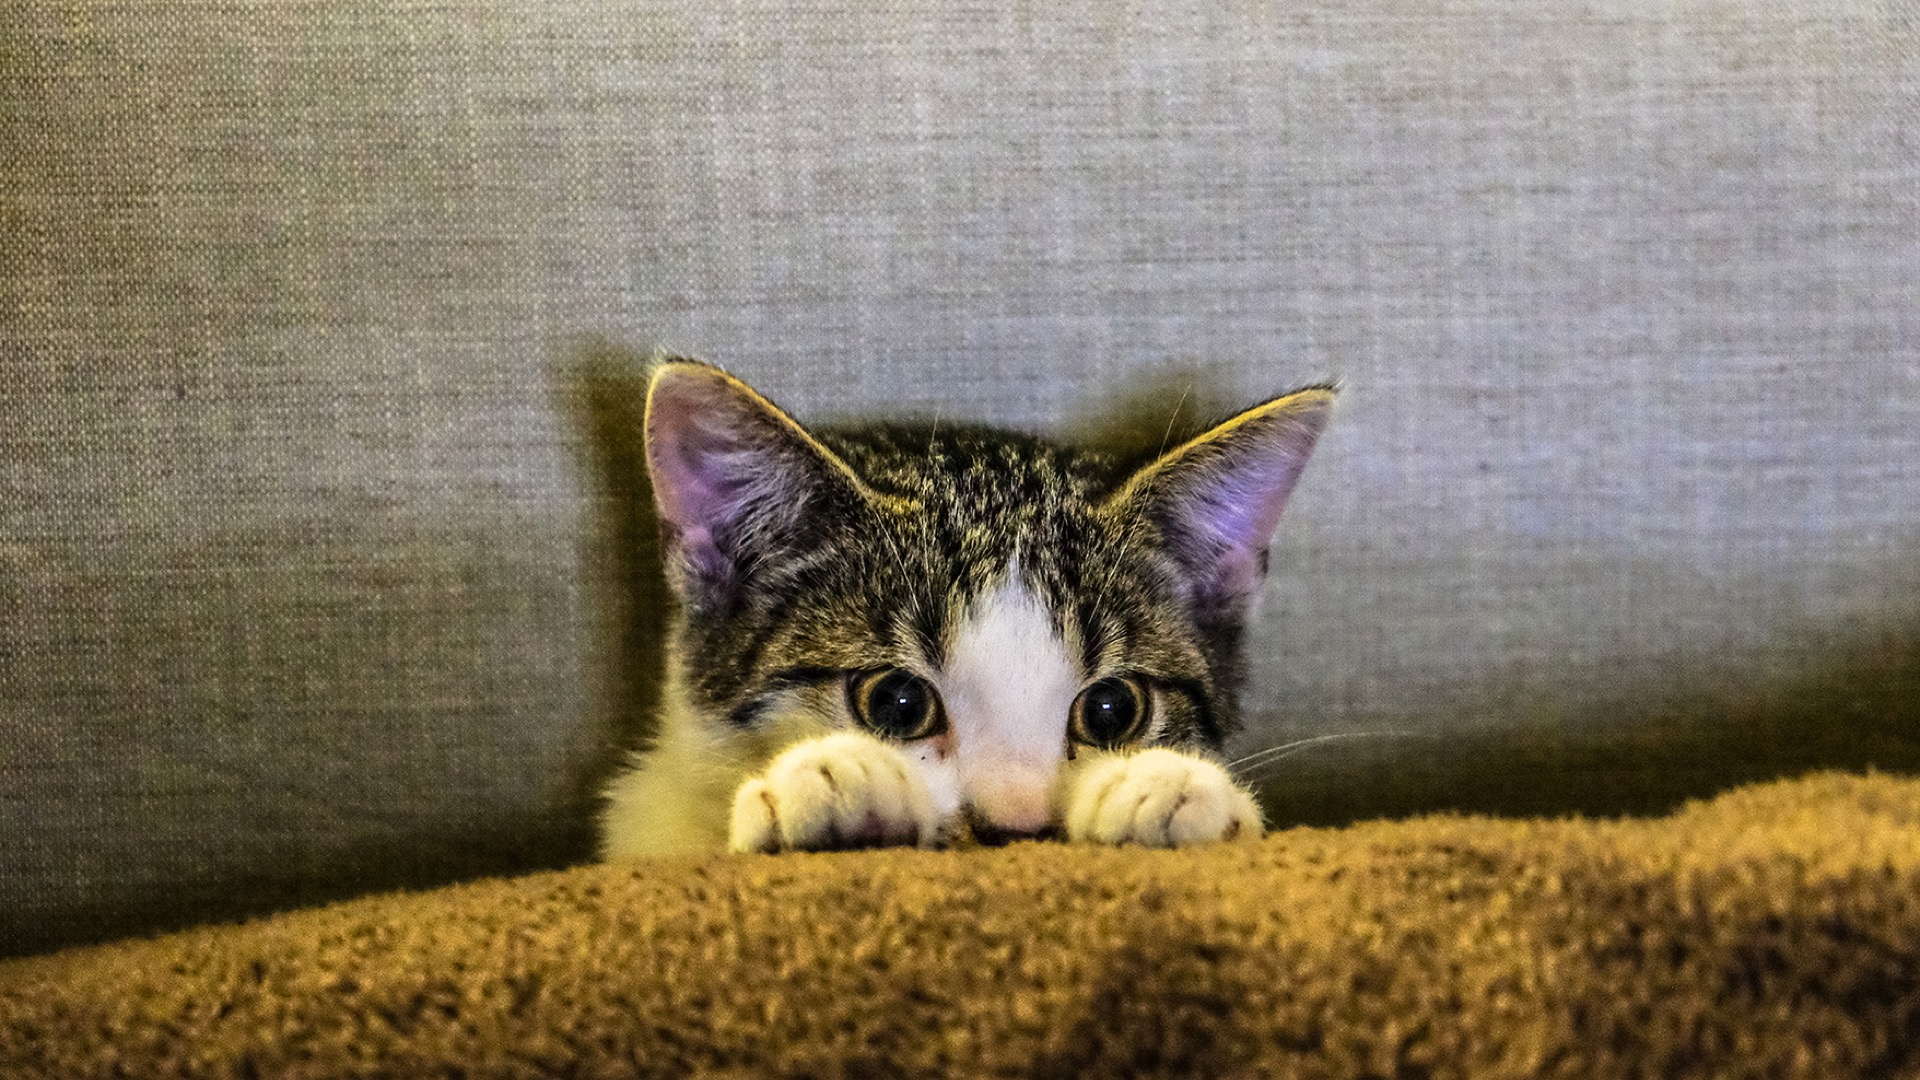 kitty peeking out from blanket